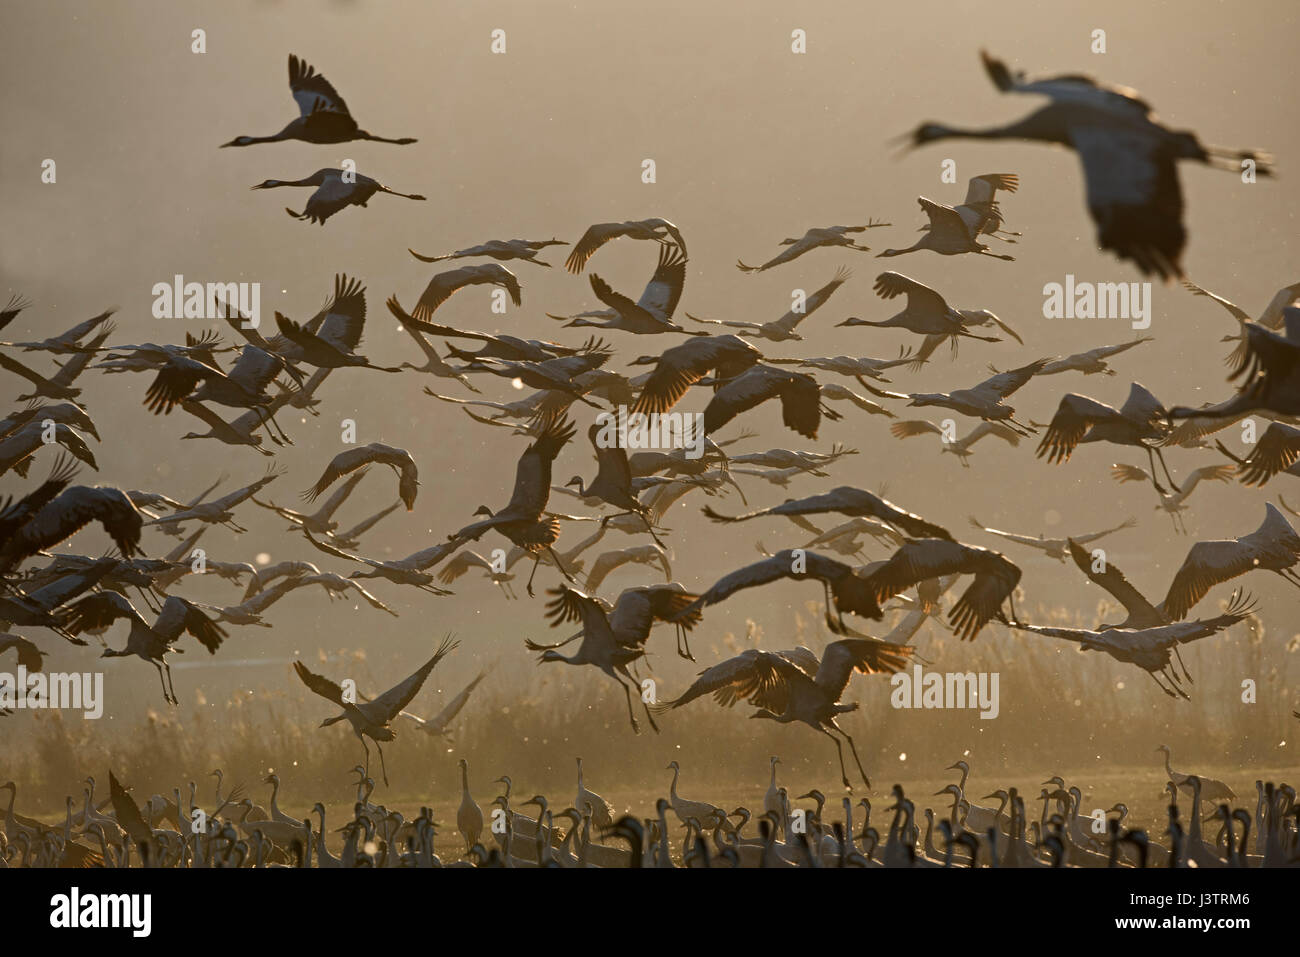 Common Cranes, Grus grus, wintering at  the Hula Lake Park, known in Hebrew as Agamon HaHula in the Hula Valley Northern Israel.  Farmers spread 8 ton Stock Photo